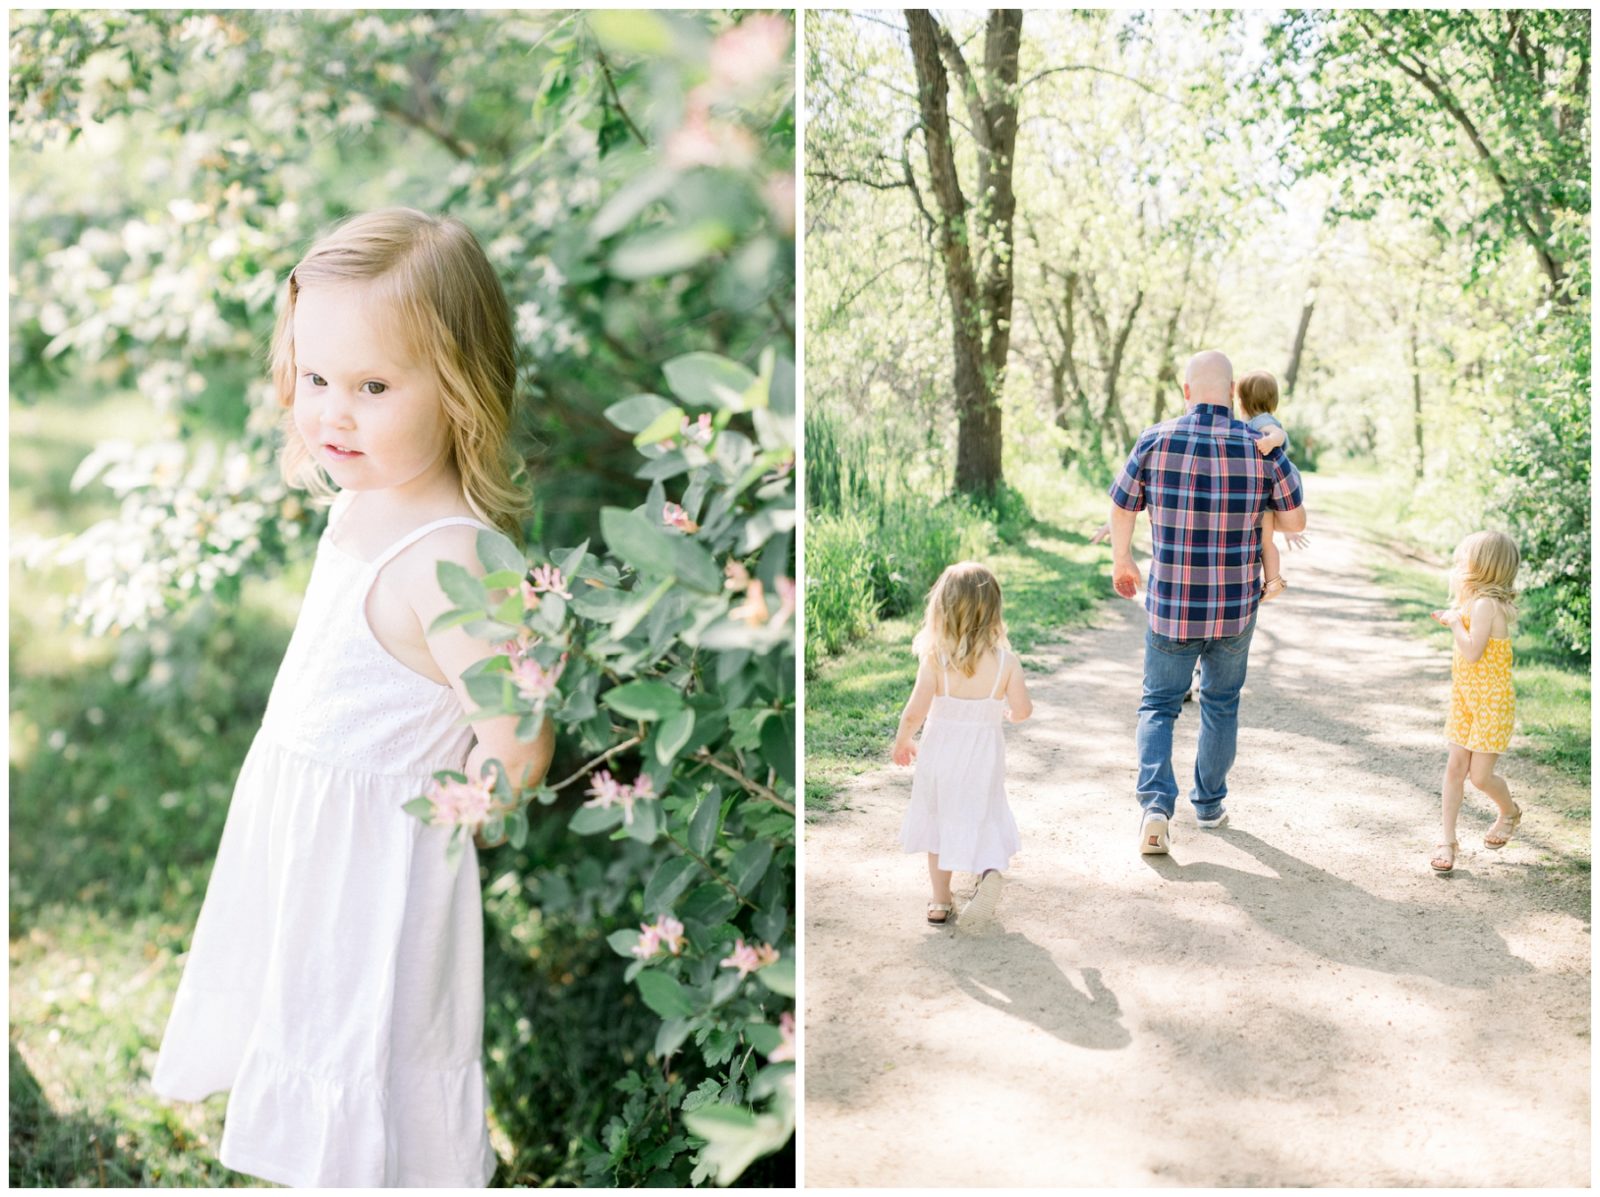 Two photos. One shows a little girl in a white dress. The other shows a father holding one of his daughters and his other two little daughters walking right by his side.